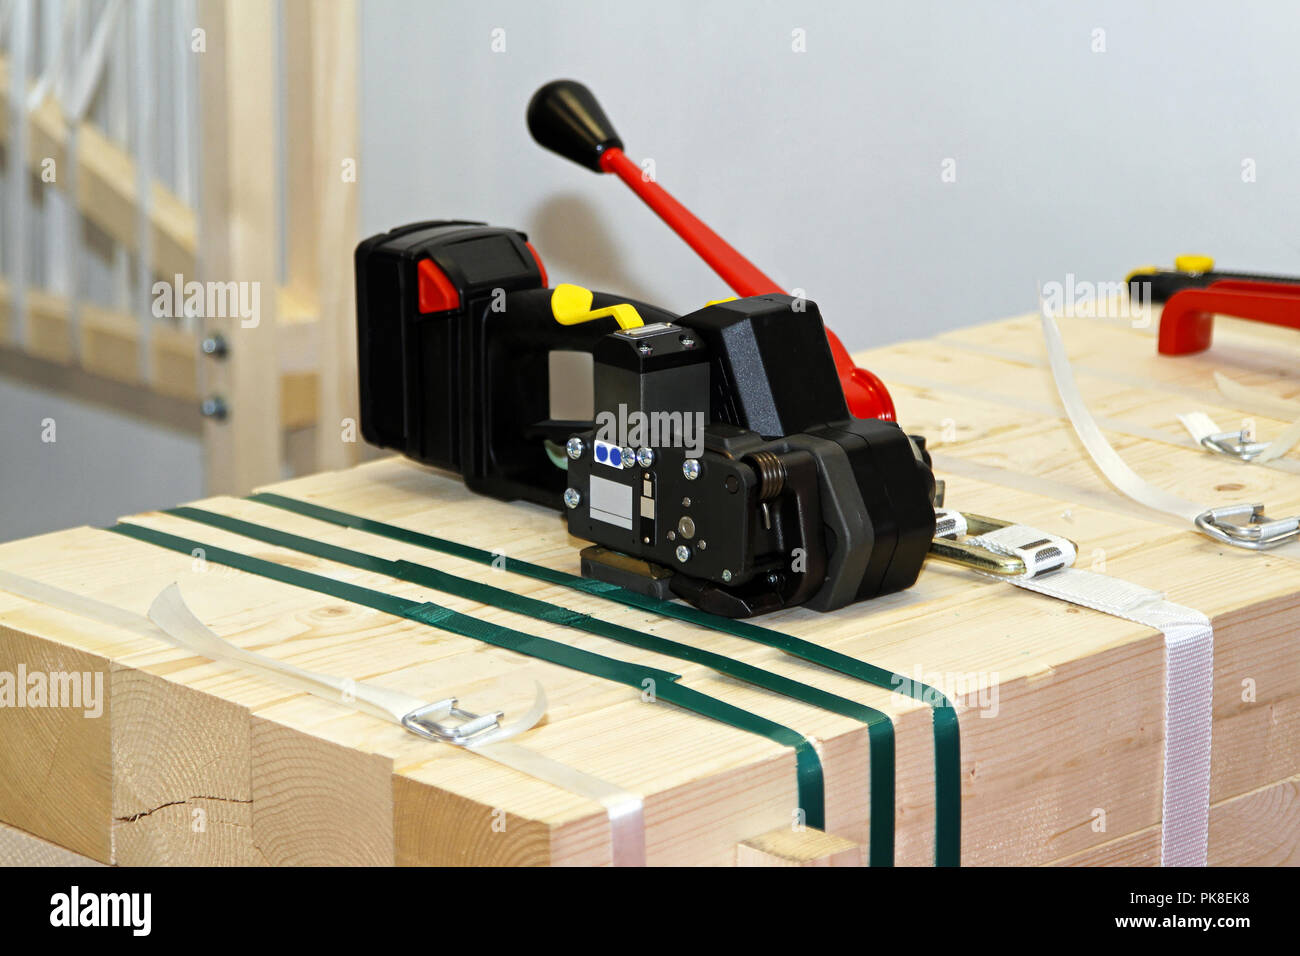 Portable strapping machine for packing crates and boxes Stock Photo